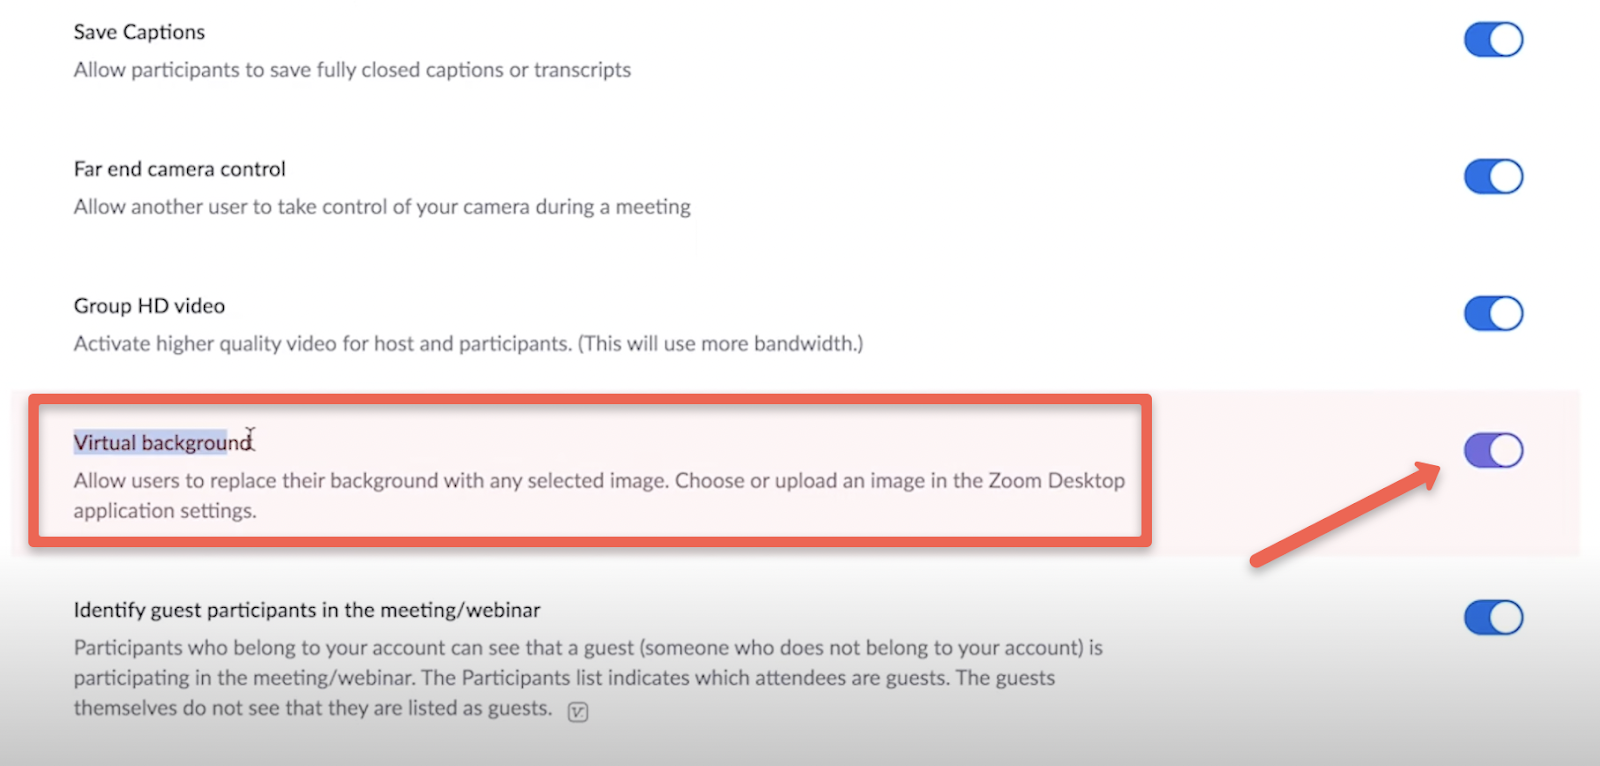 Showcasing how to select a virtual background in Zoom.